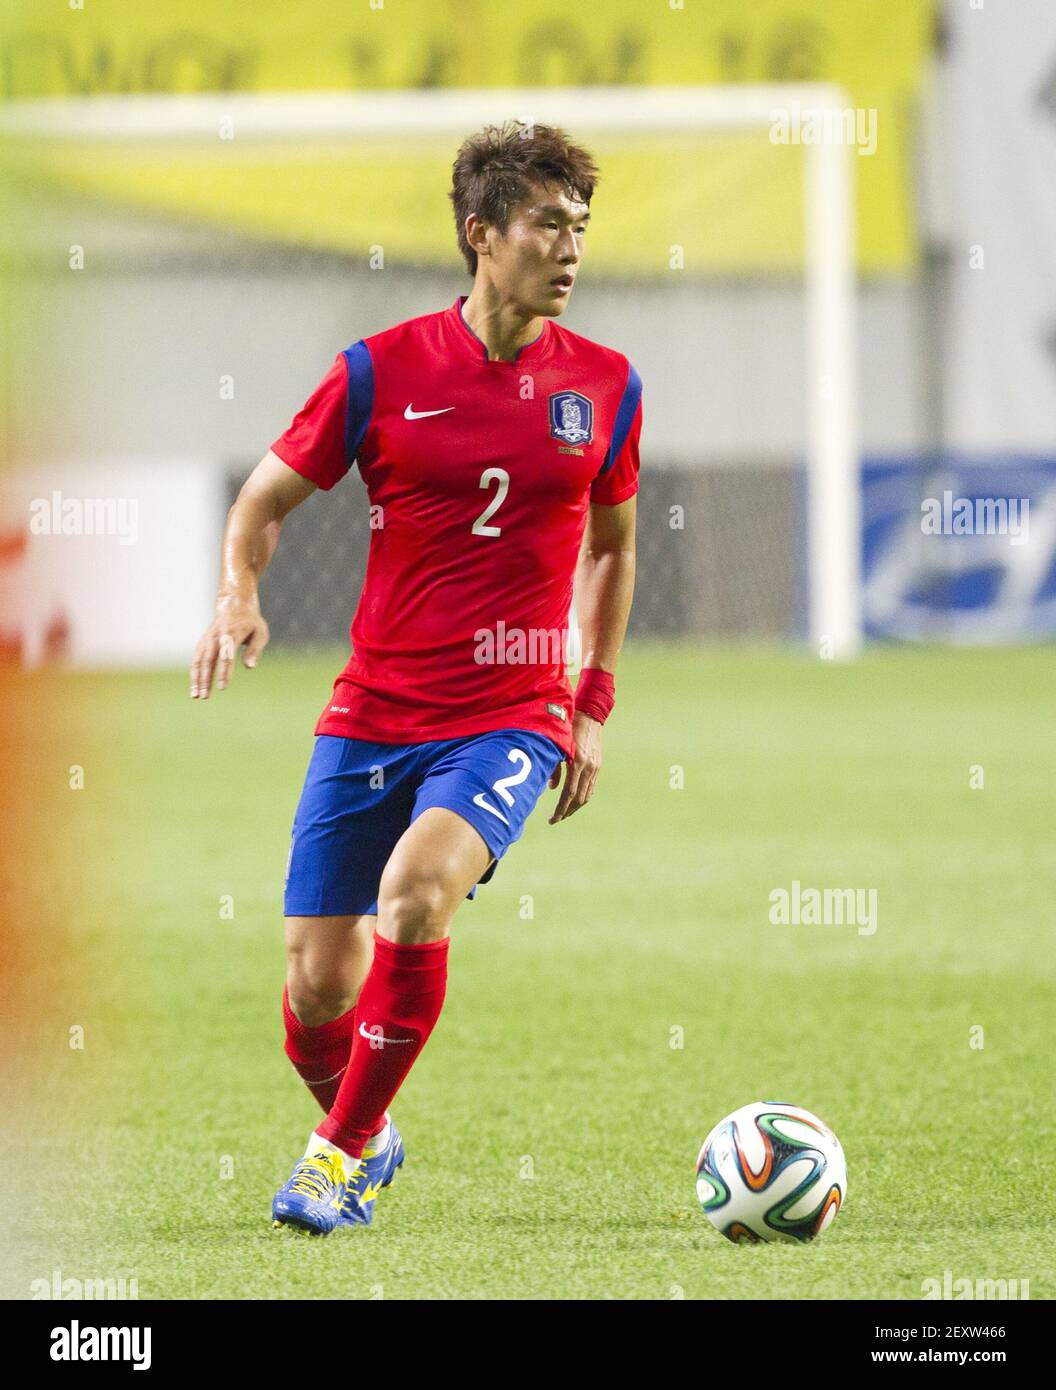 28 May 2014 - Seoul, South Korea : South Korea national soccer team player Lee Yong, South Korea will play against Russia, Belgium and Algeria in Group H of the FIFA World Cup 2014 in Brazil. Photo Credit: Lee Young-ho/Sipa USA Stock Photo